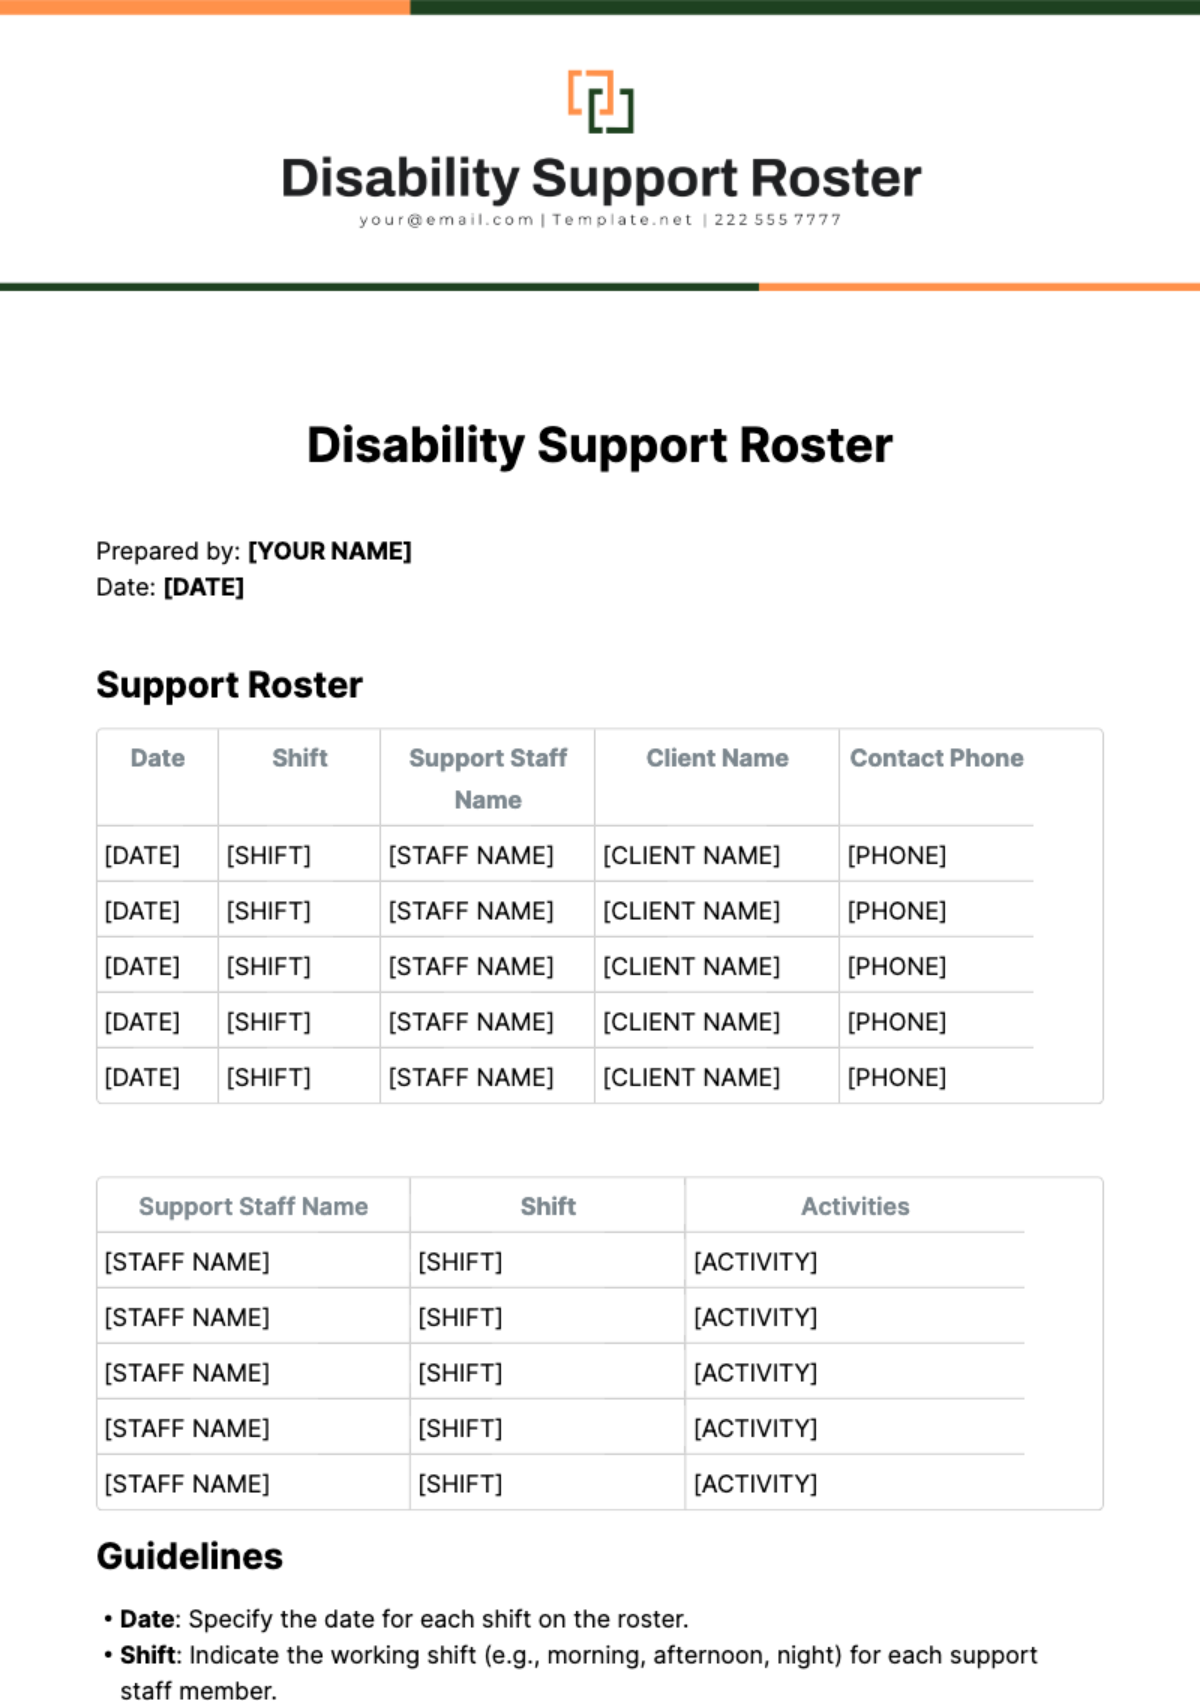 Disability Support Roster Template